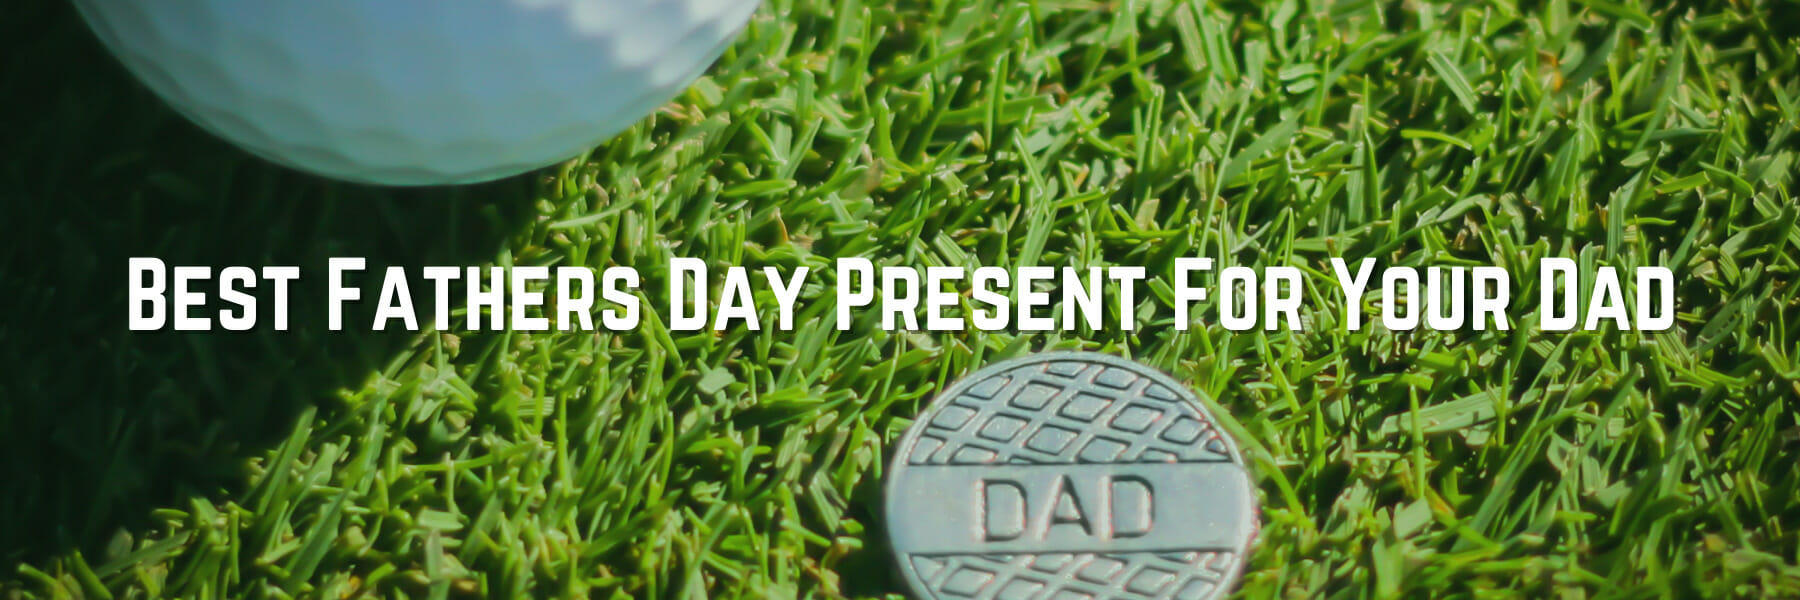 Best Fathers Day Present For Your Dad